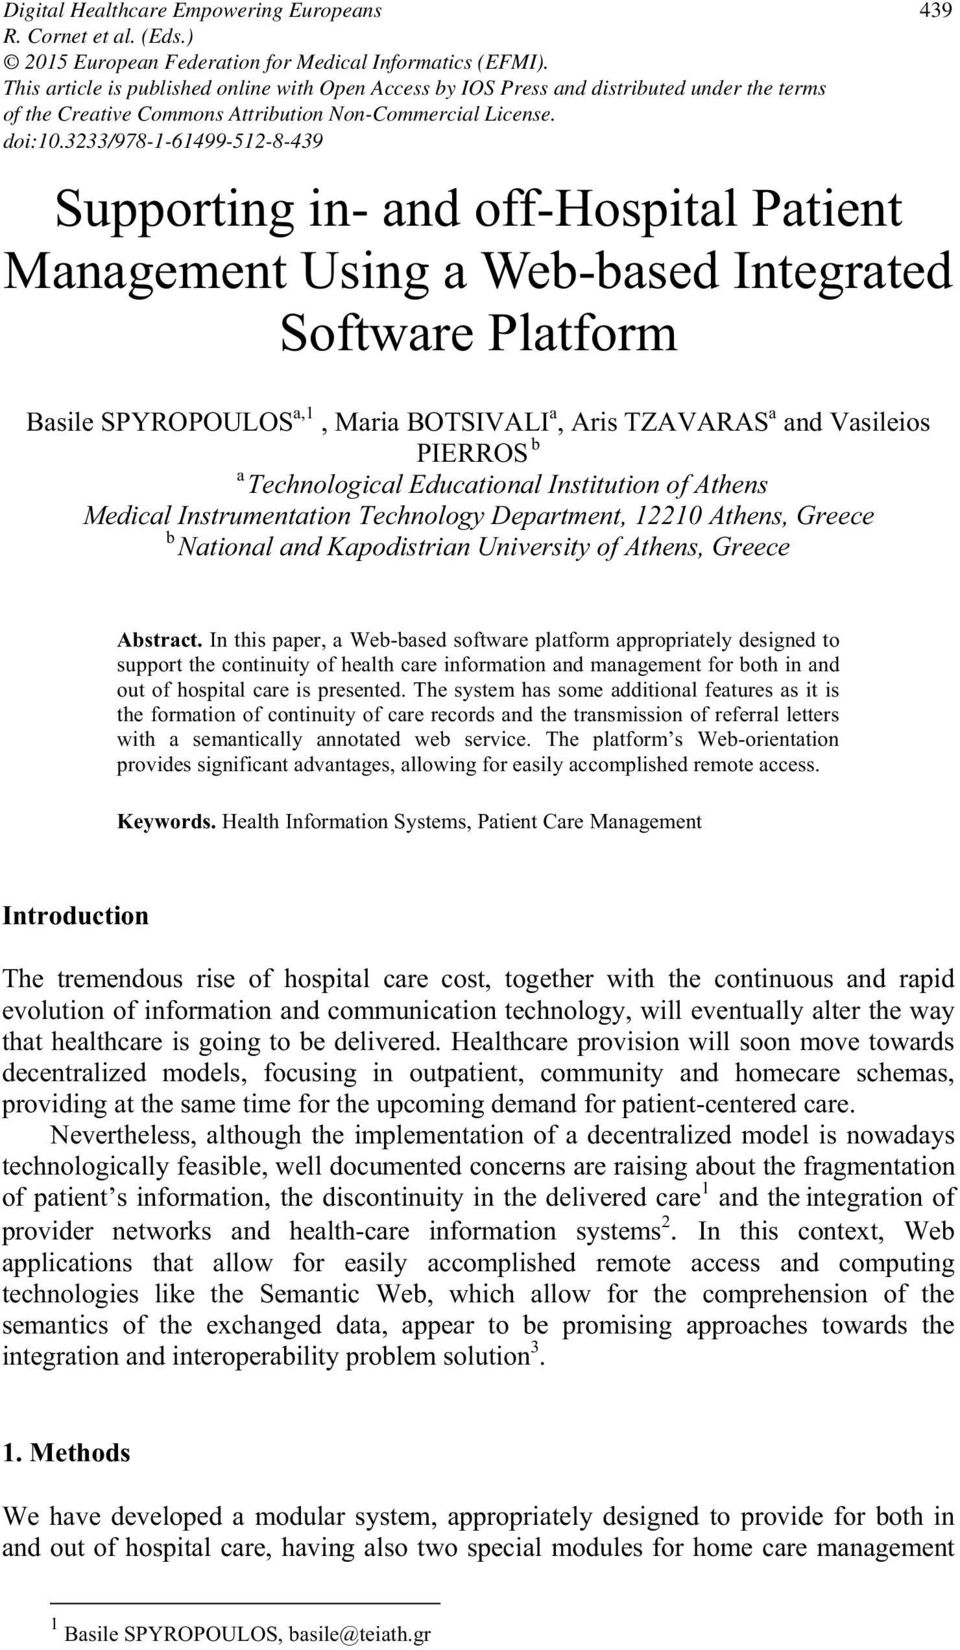 3233/978-1-61499-512-8-439 Supporting in- and off-hospital Patient Management Using a Web-based Integrated Software Platform Basile SPYROPOULOS a,1, Maria BOTSIVALI a, Aris TZAVARAS a and Vasileios b